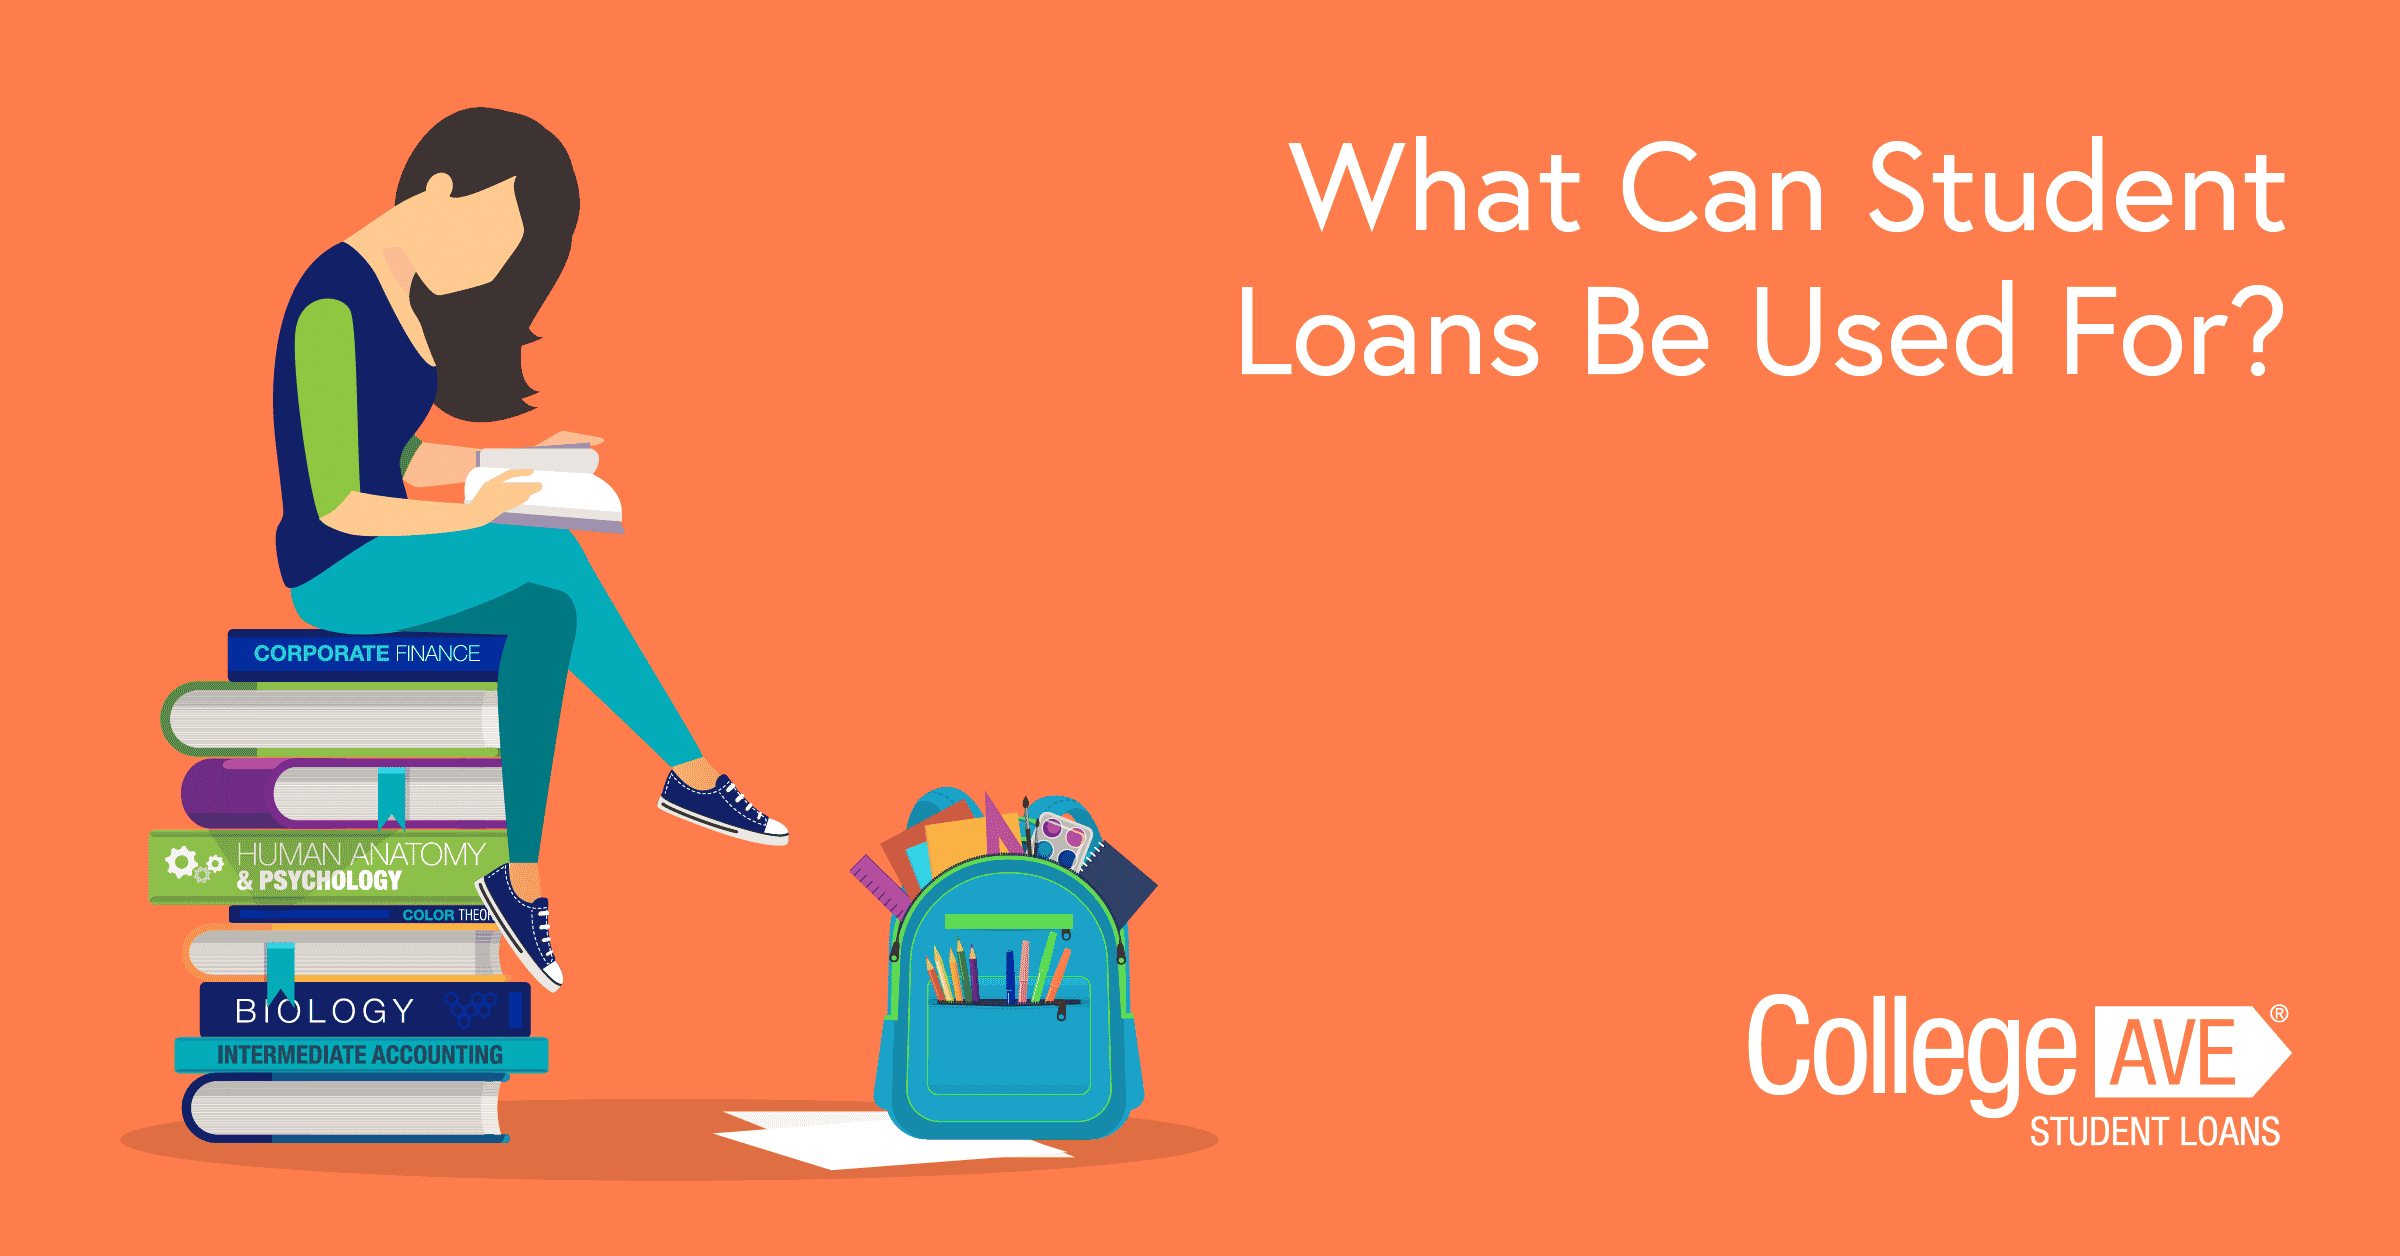 What Can Student Loans Be Used For?